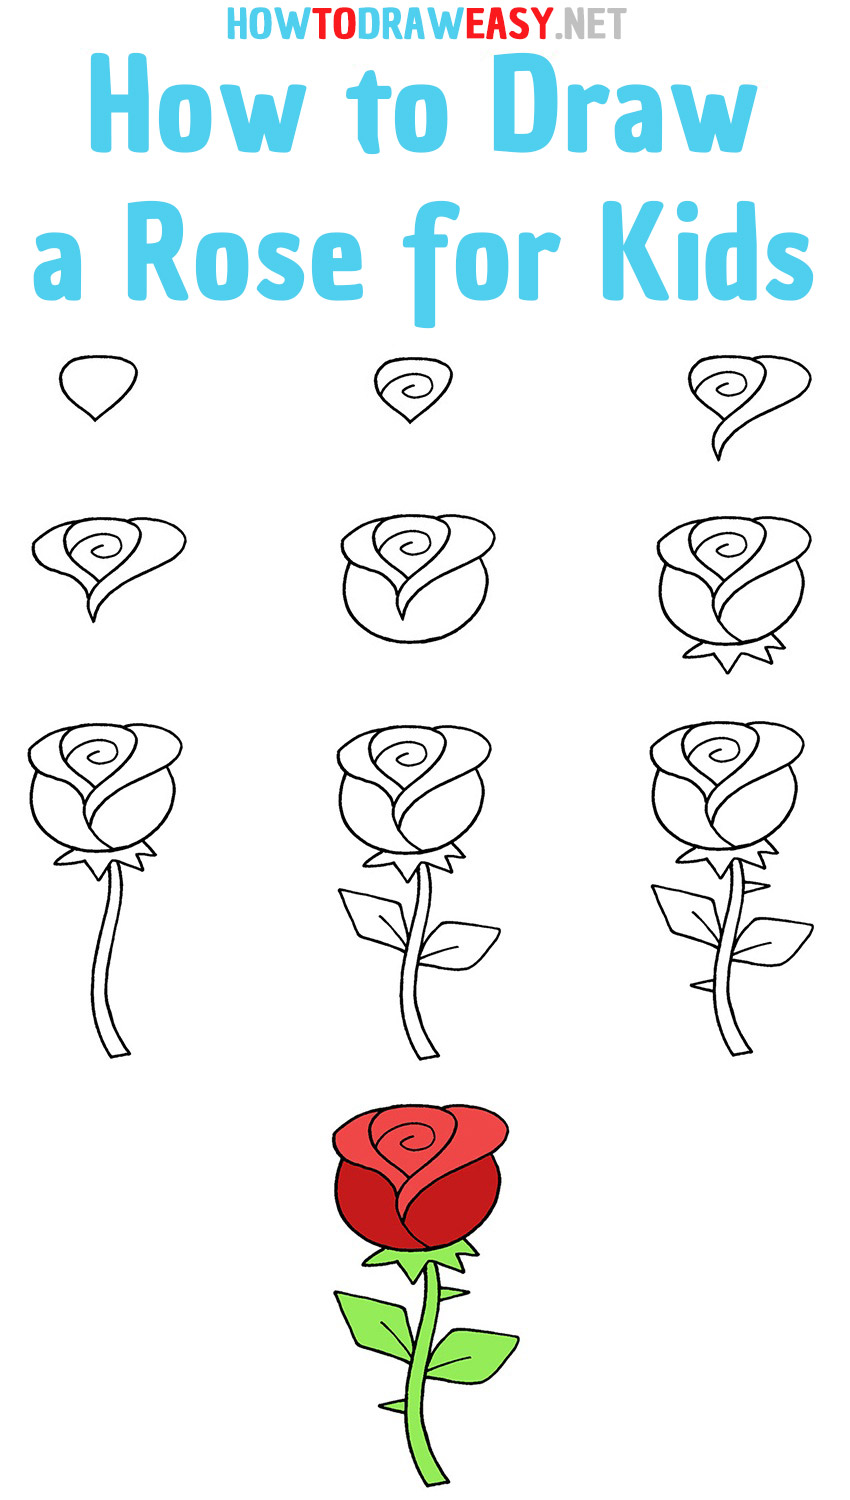 How to Draw a Rose for Kids step by step